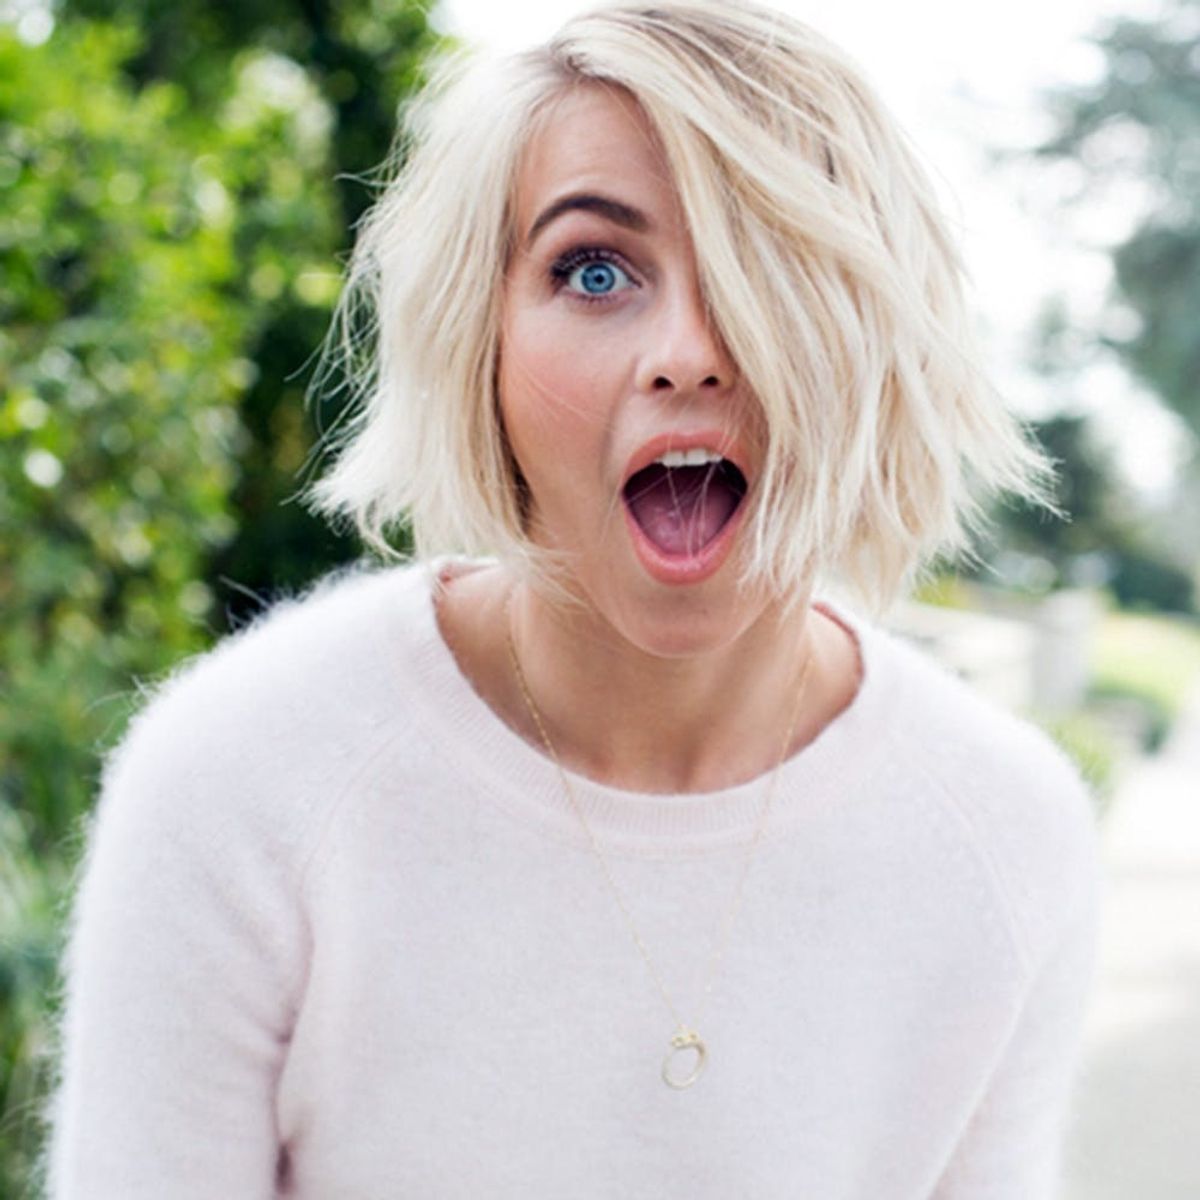 Julianne Hough Is the Next Blake With Her New Lifestyle Site